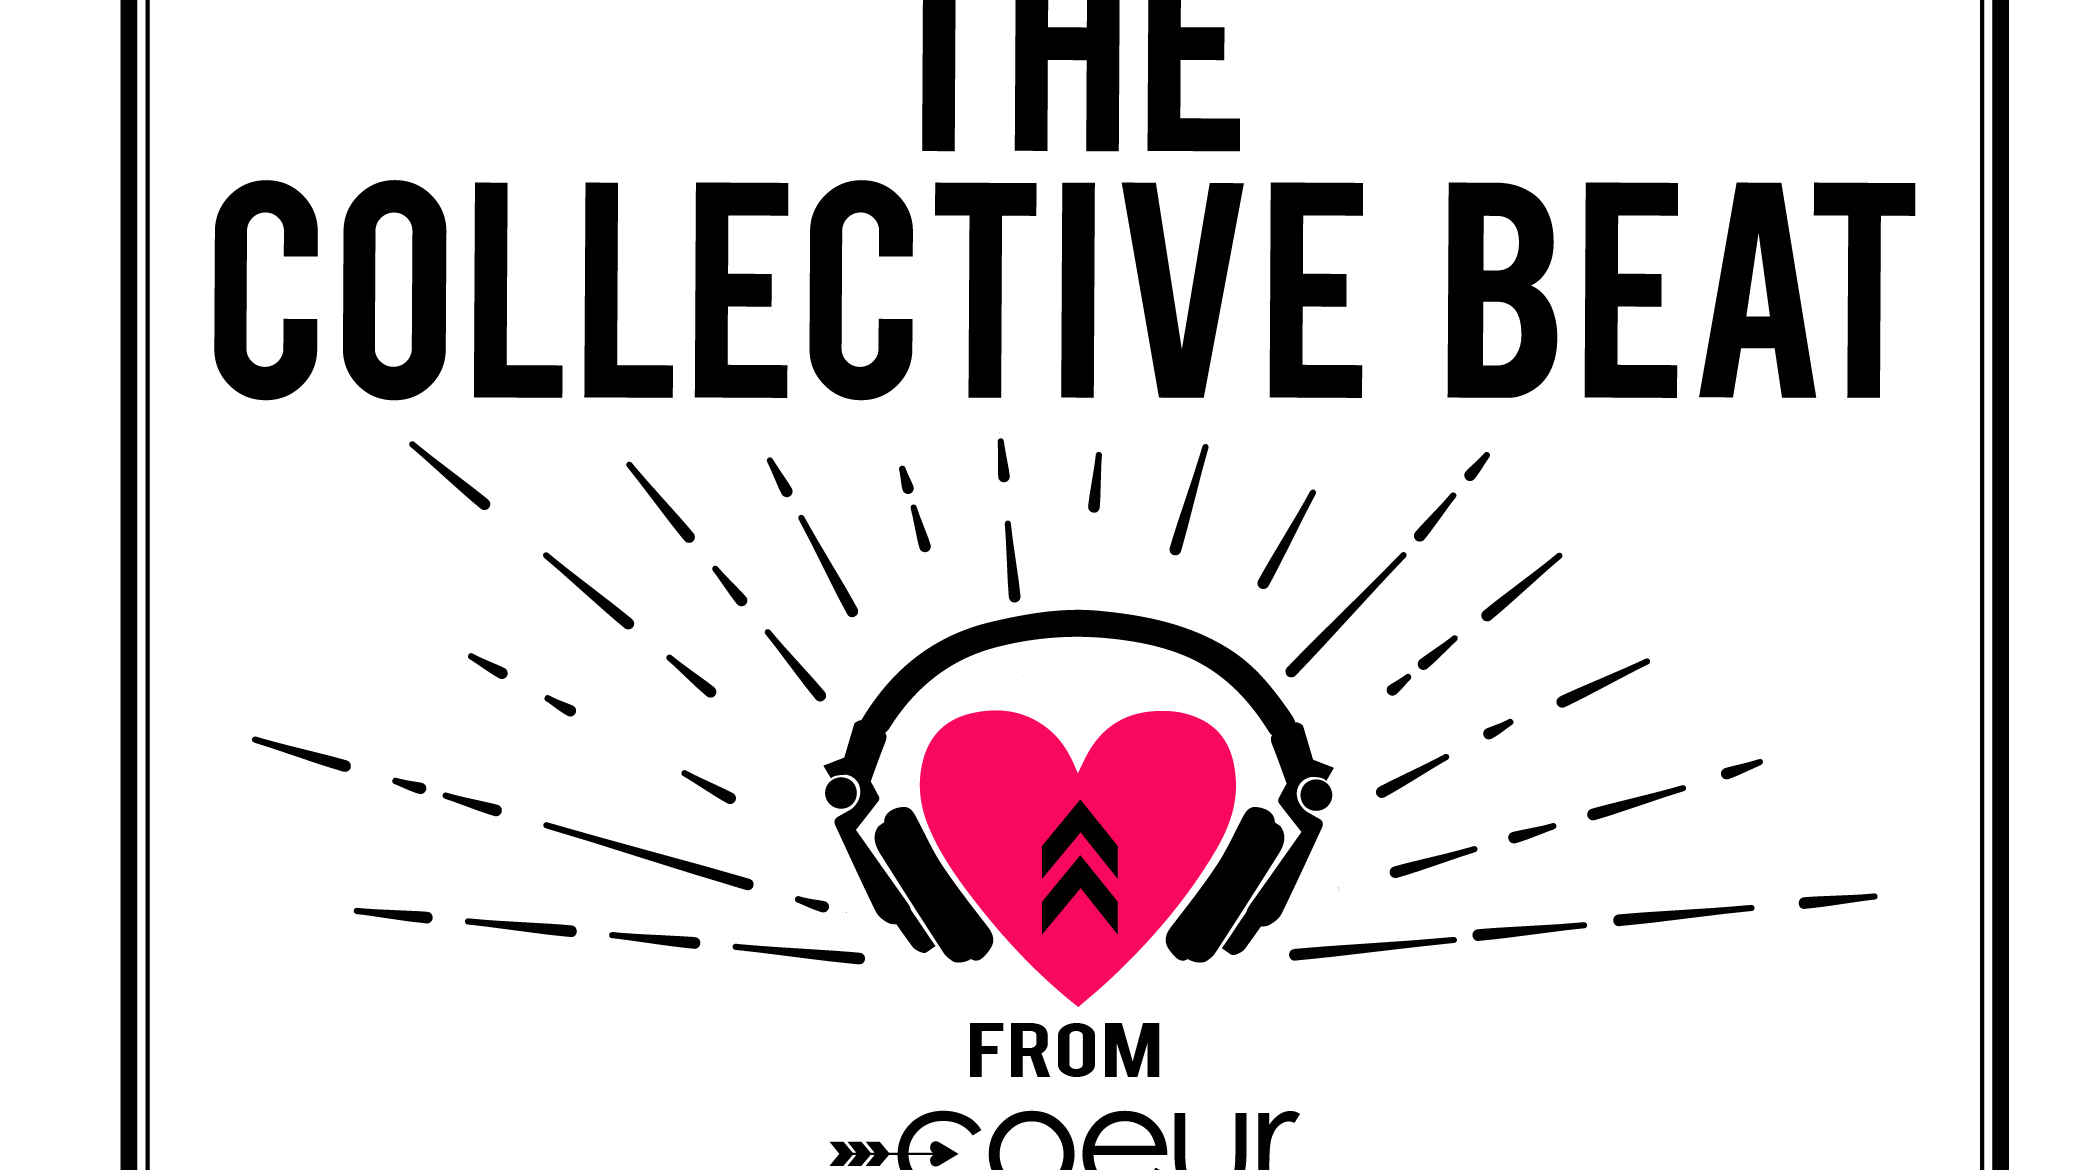 The Collective Beat from Coeur Sports